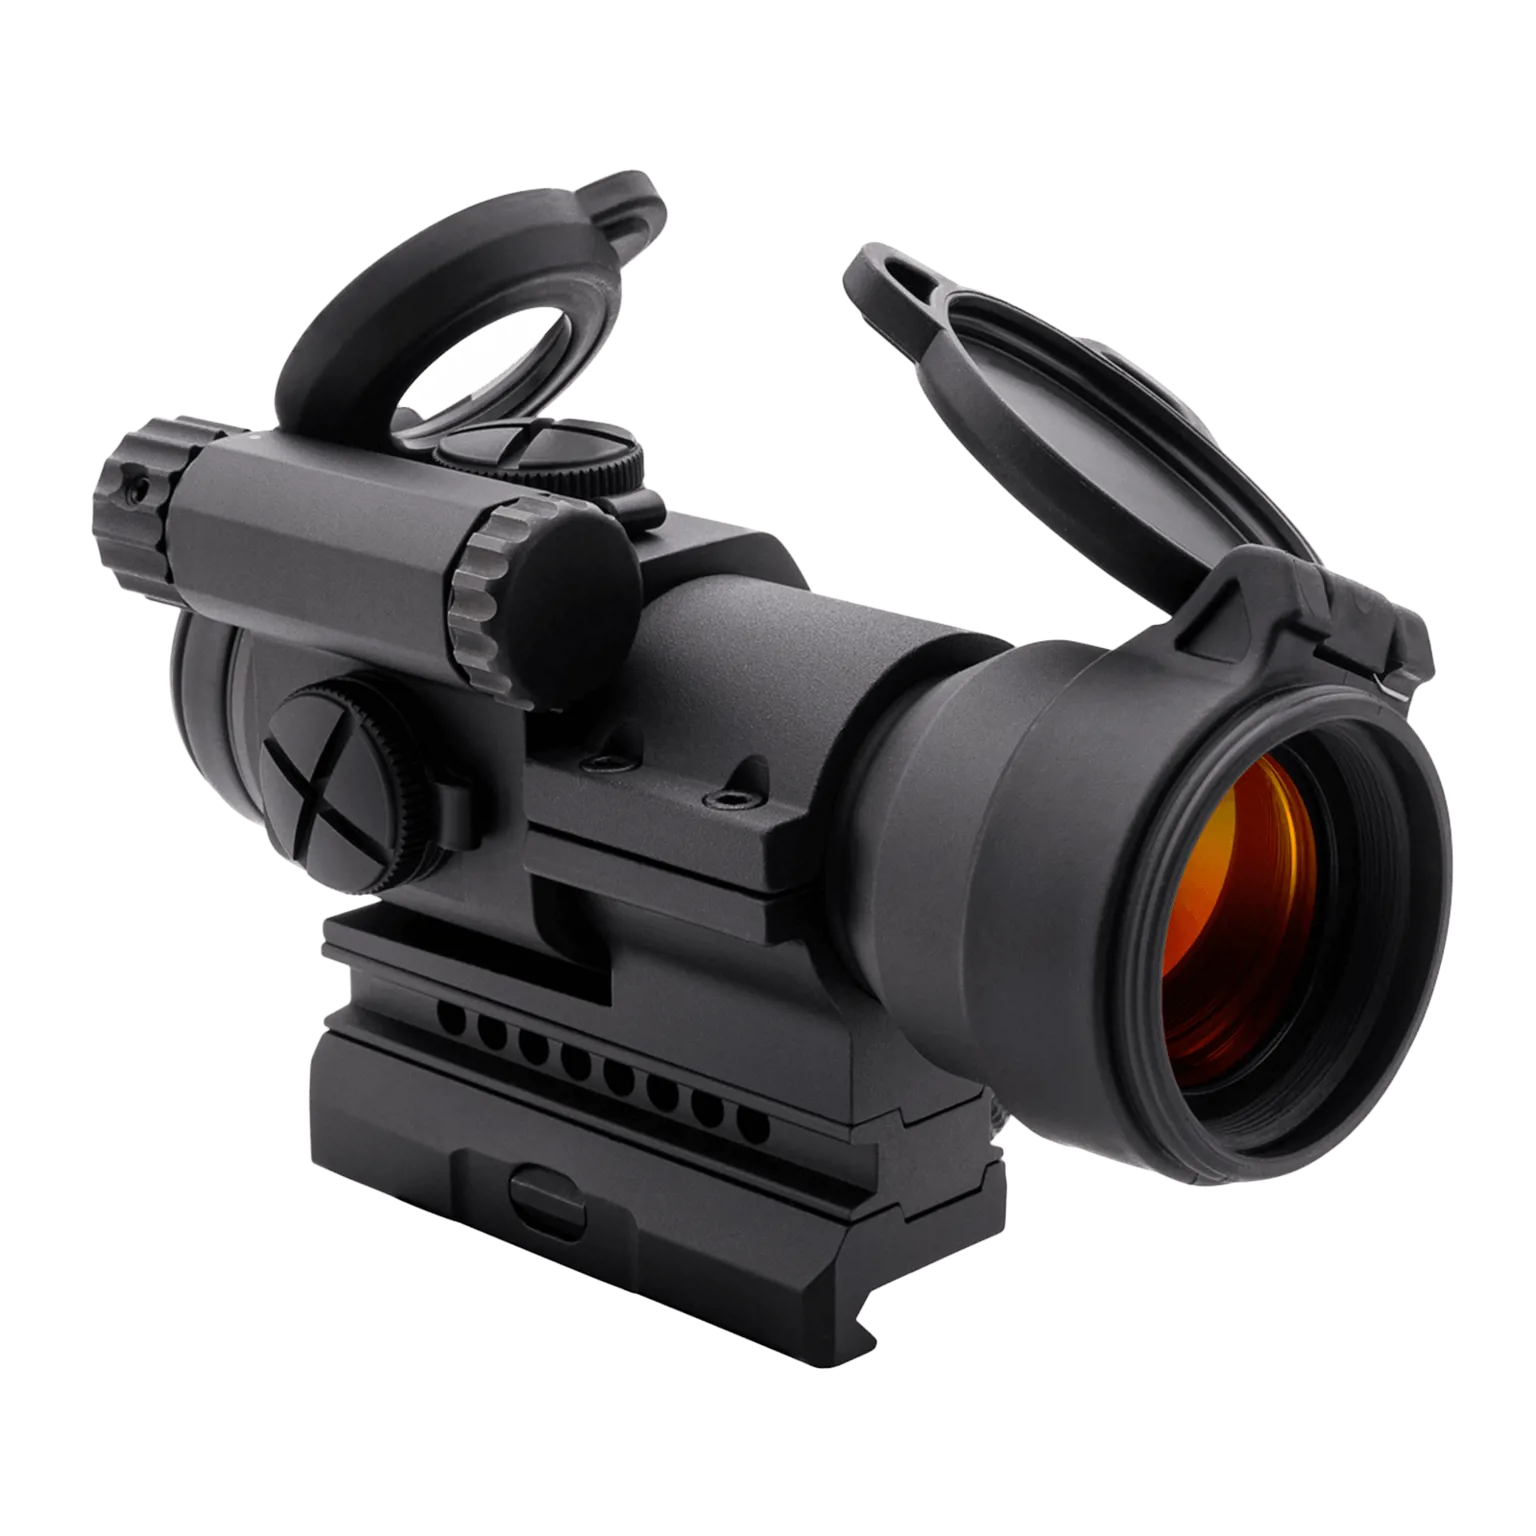 PRO™ - Patrol Rifle Optic 2 MOA - Red dot reflex sight with standard spacer and QRP2 mount - 3